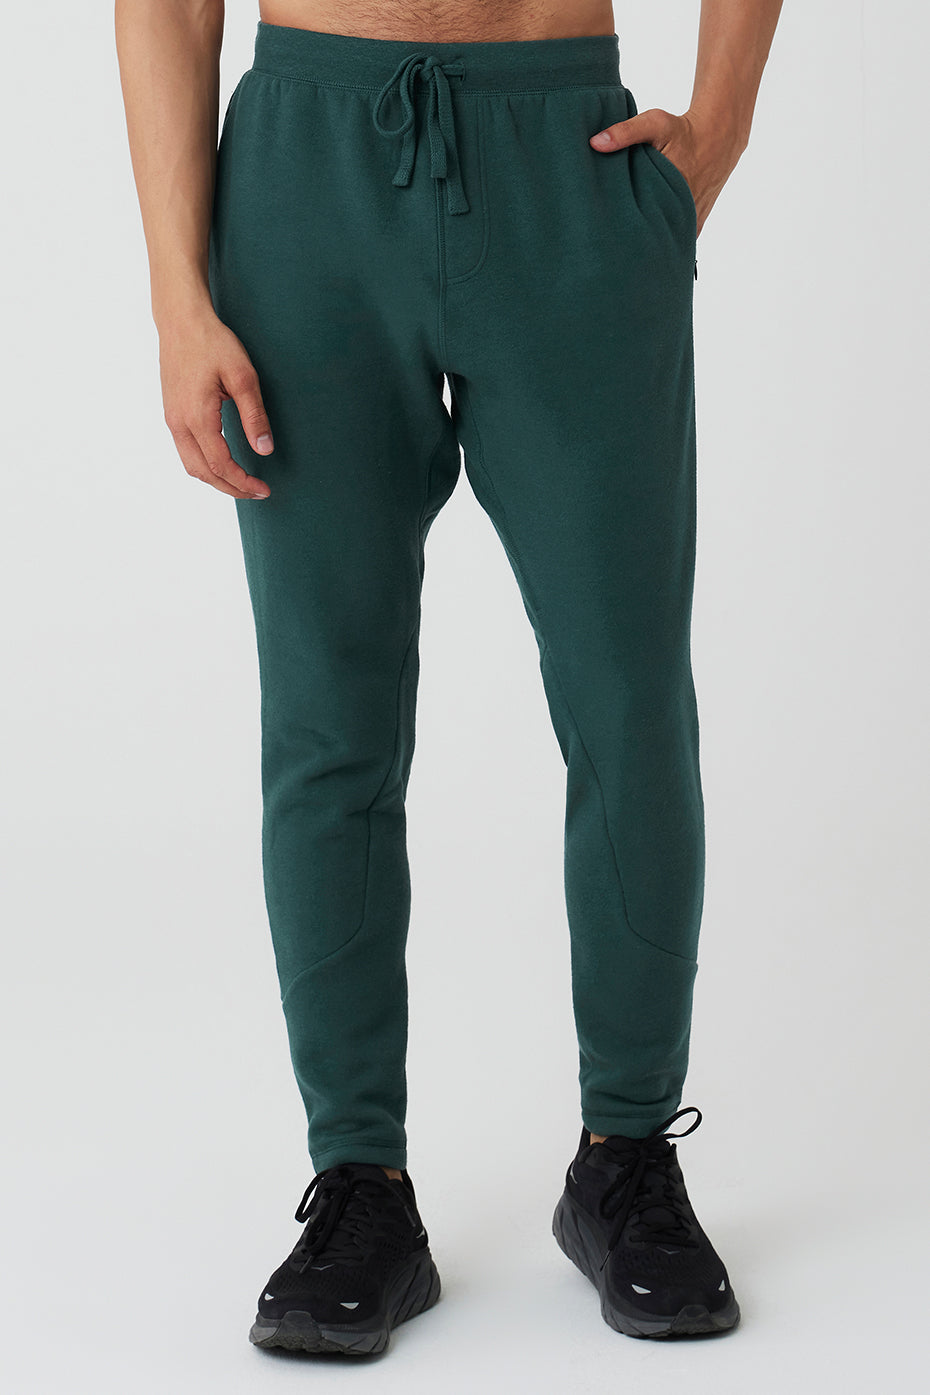 Alo Solid Green Active Pants Size XS - 54% off